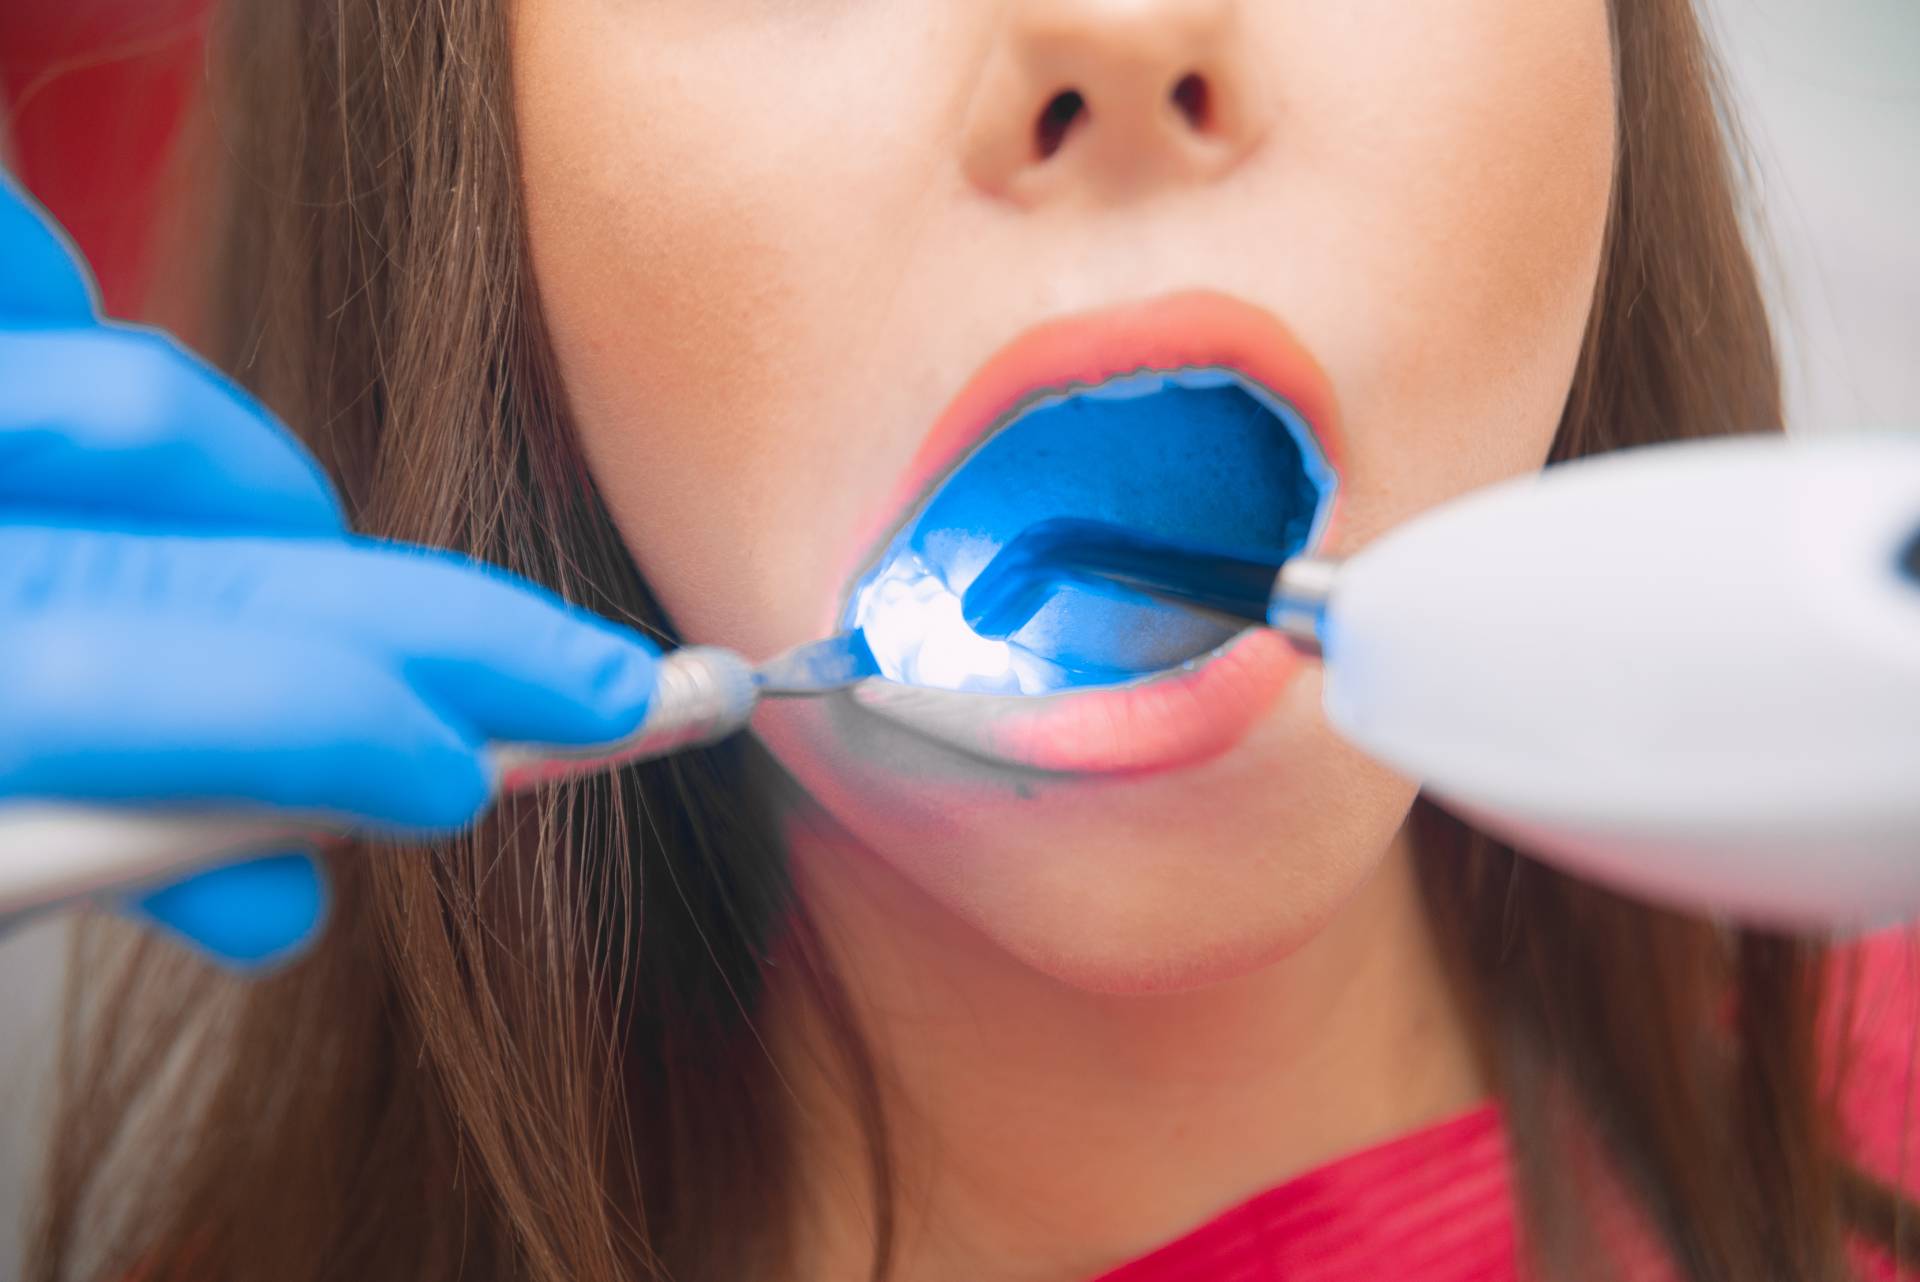 Dental restoration in dentistry with a photopolymer lamp. The girl at the dentist's appointment. Close-up of the oral cavity